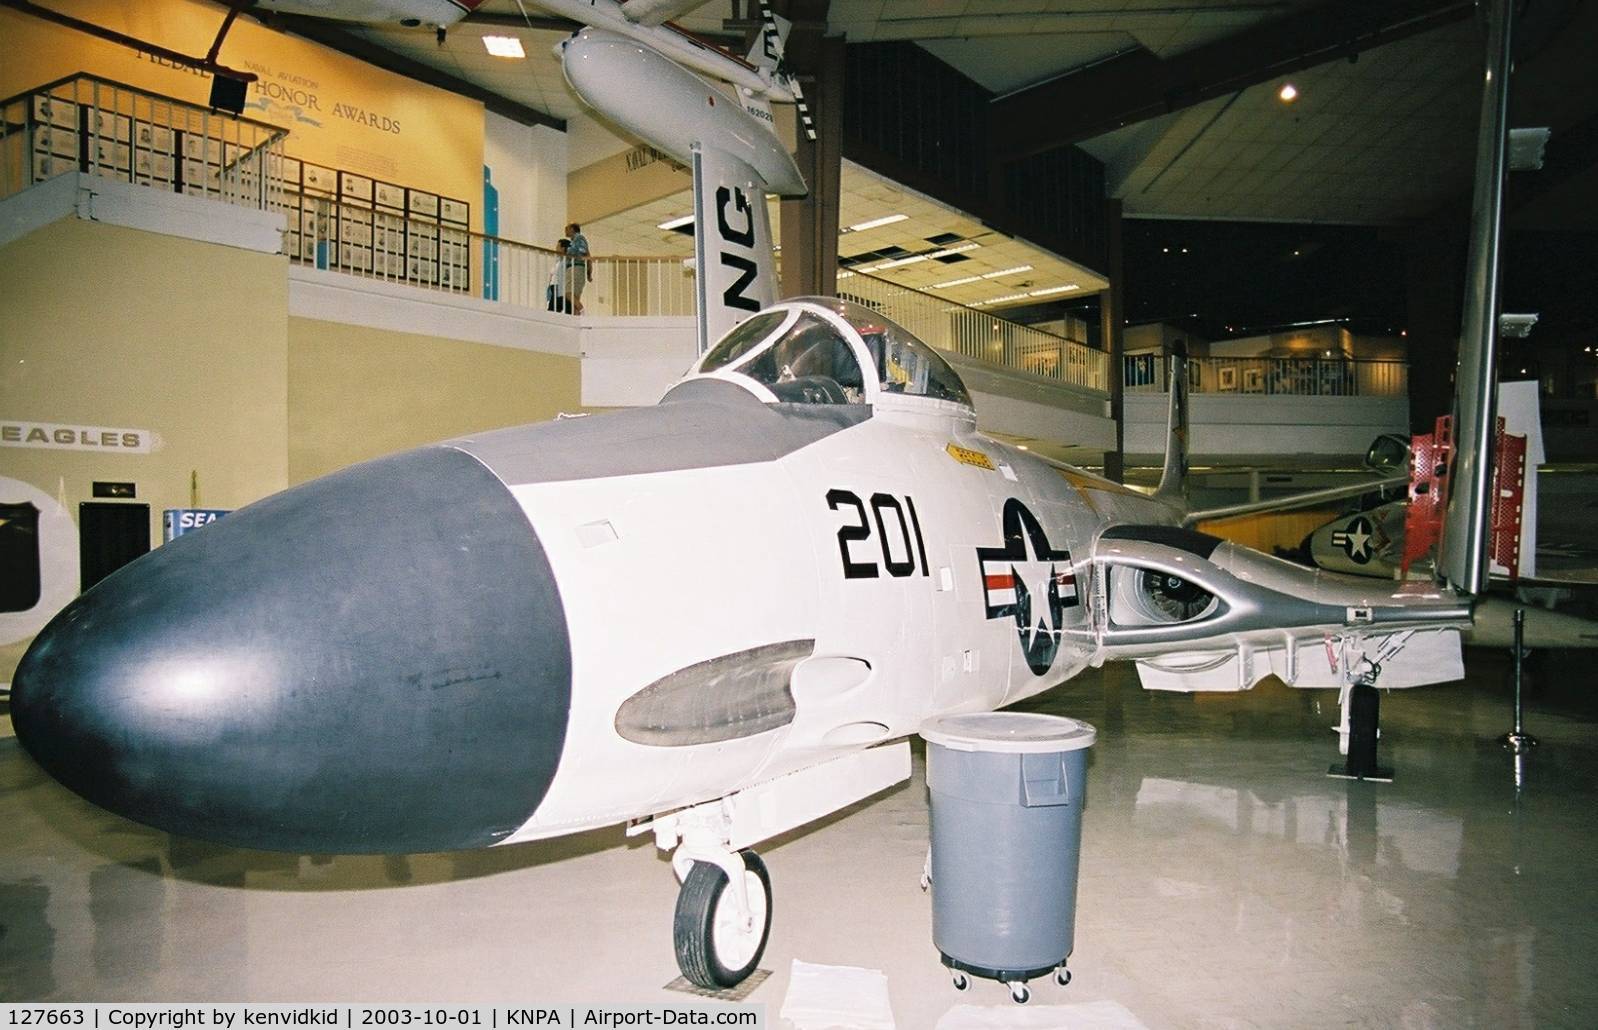 127663, McDonnell F2H-4/F-2D Banshee C/N 250, On display at the Museum of Naval Aviation, Pensacola. Painted as 126419.